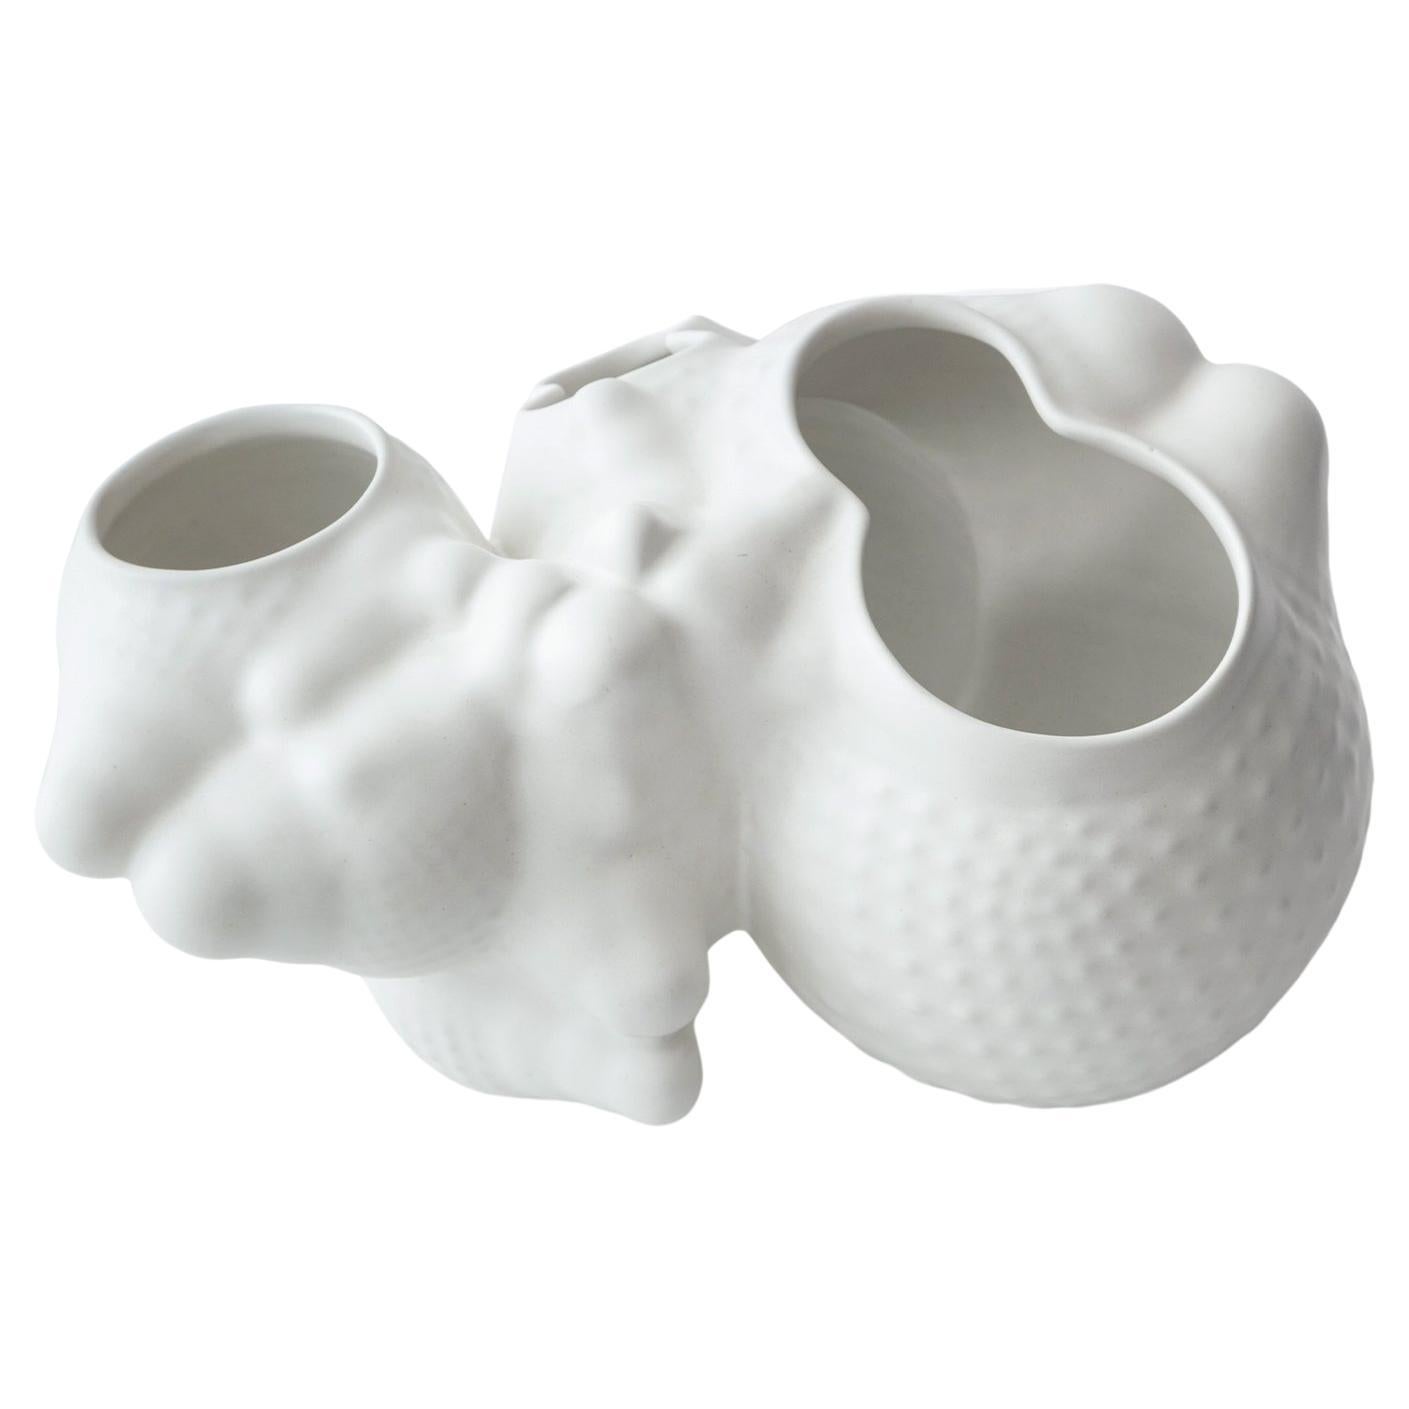 Organic Modern Ceramic Botryoidal Bubbly Planter in White by Forma Rosa Studio